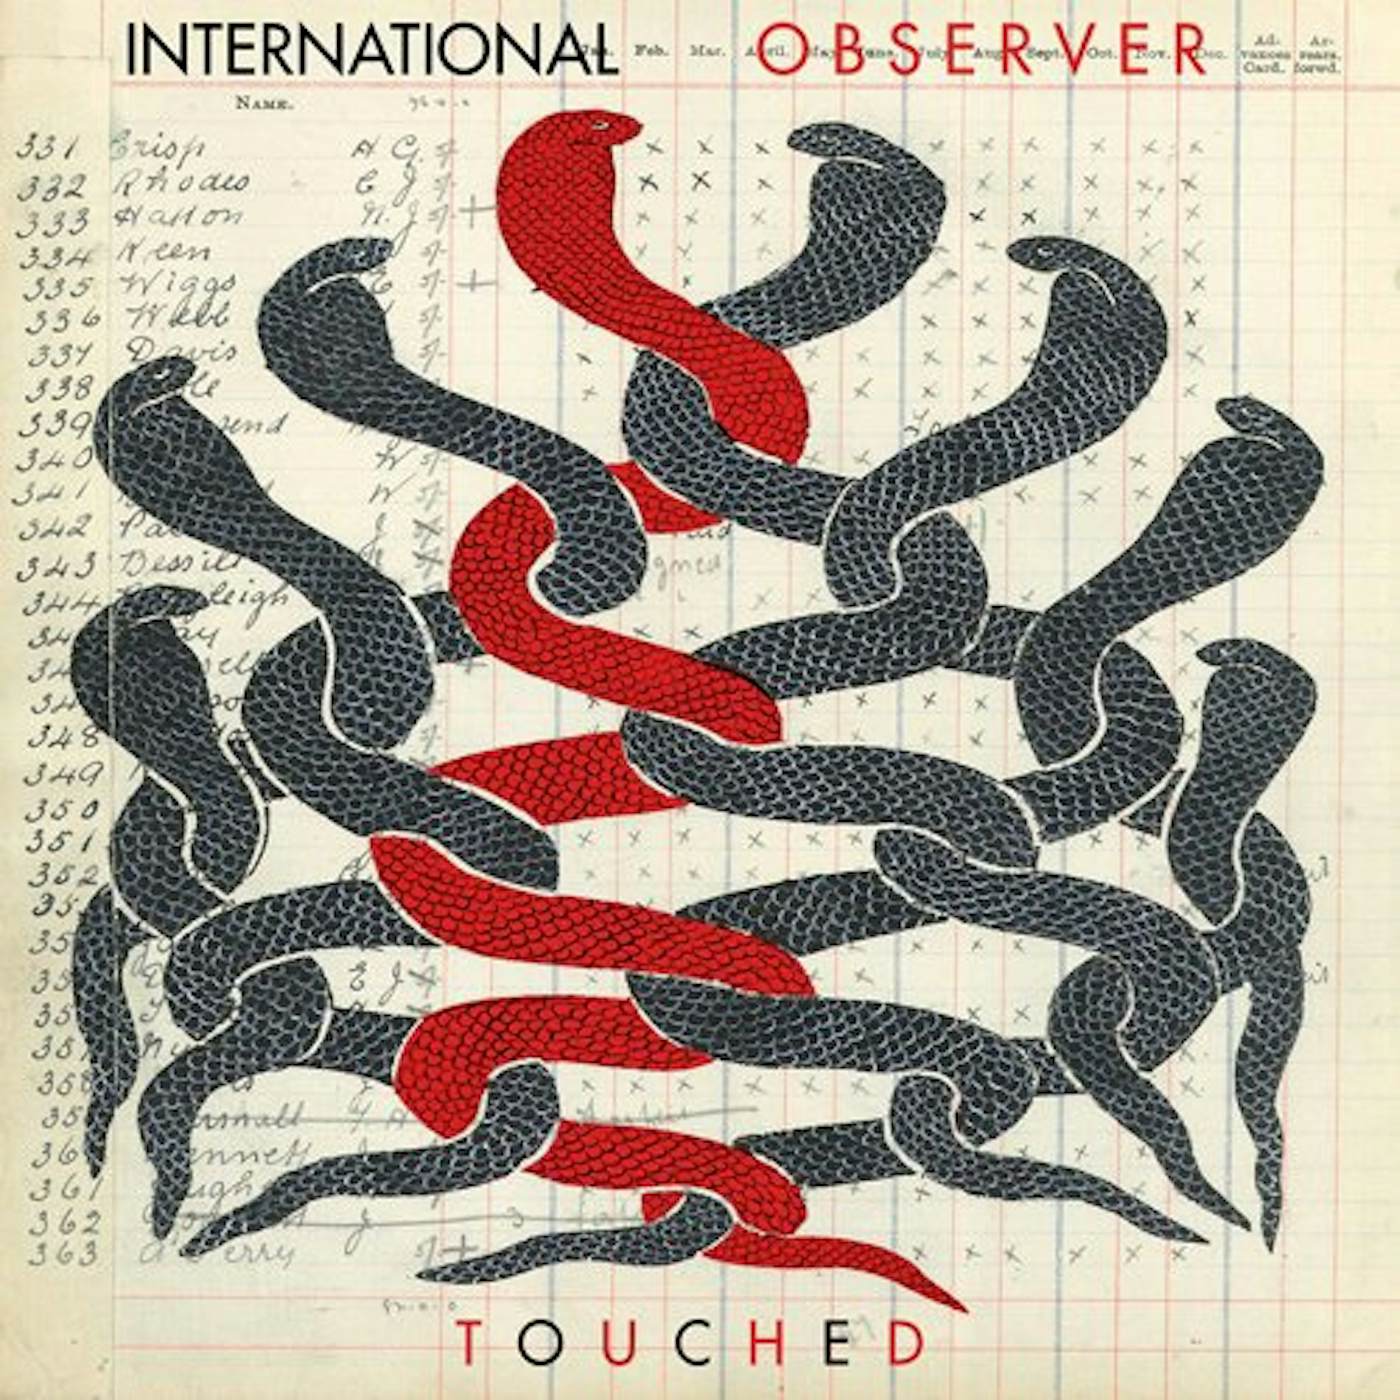 International Observer TOUCHED CD